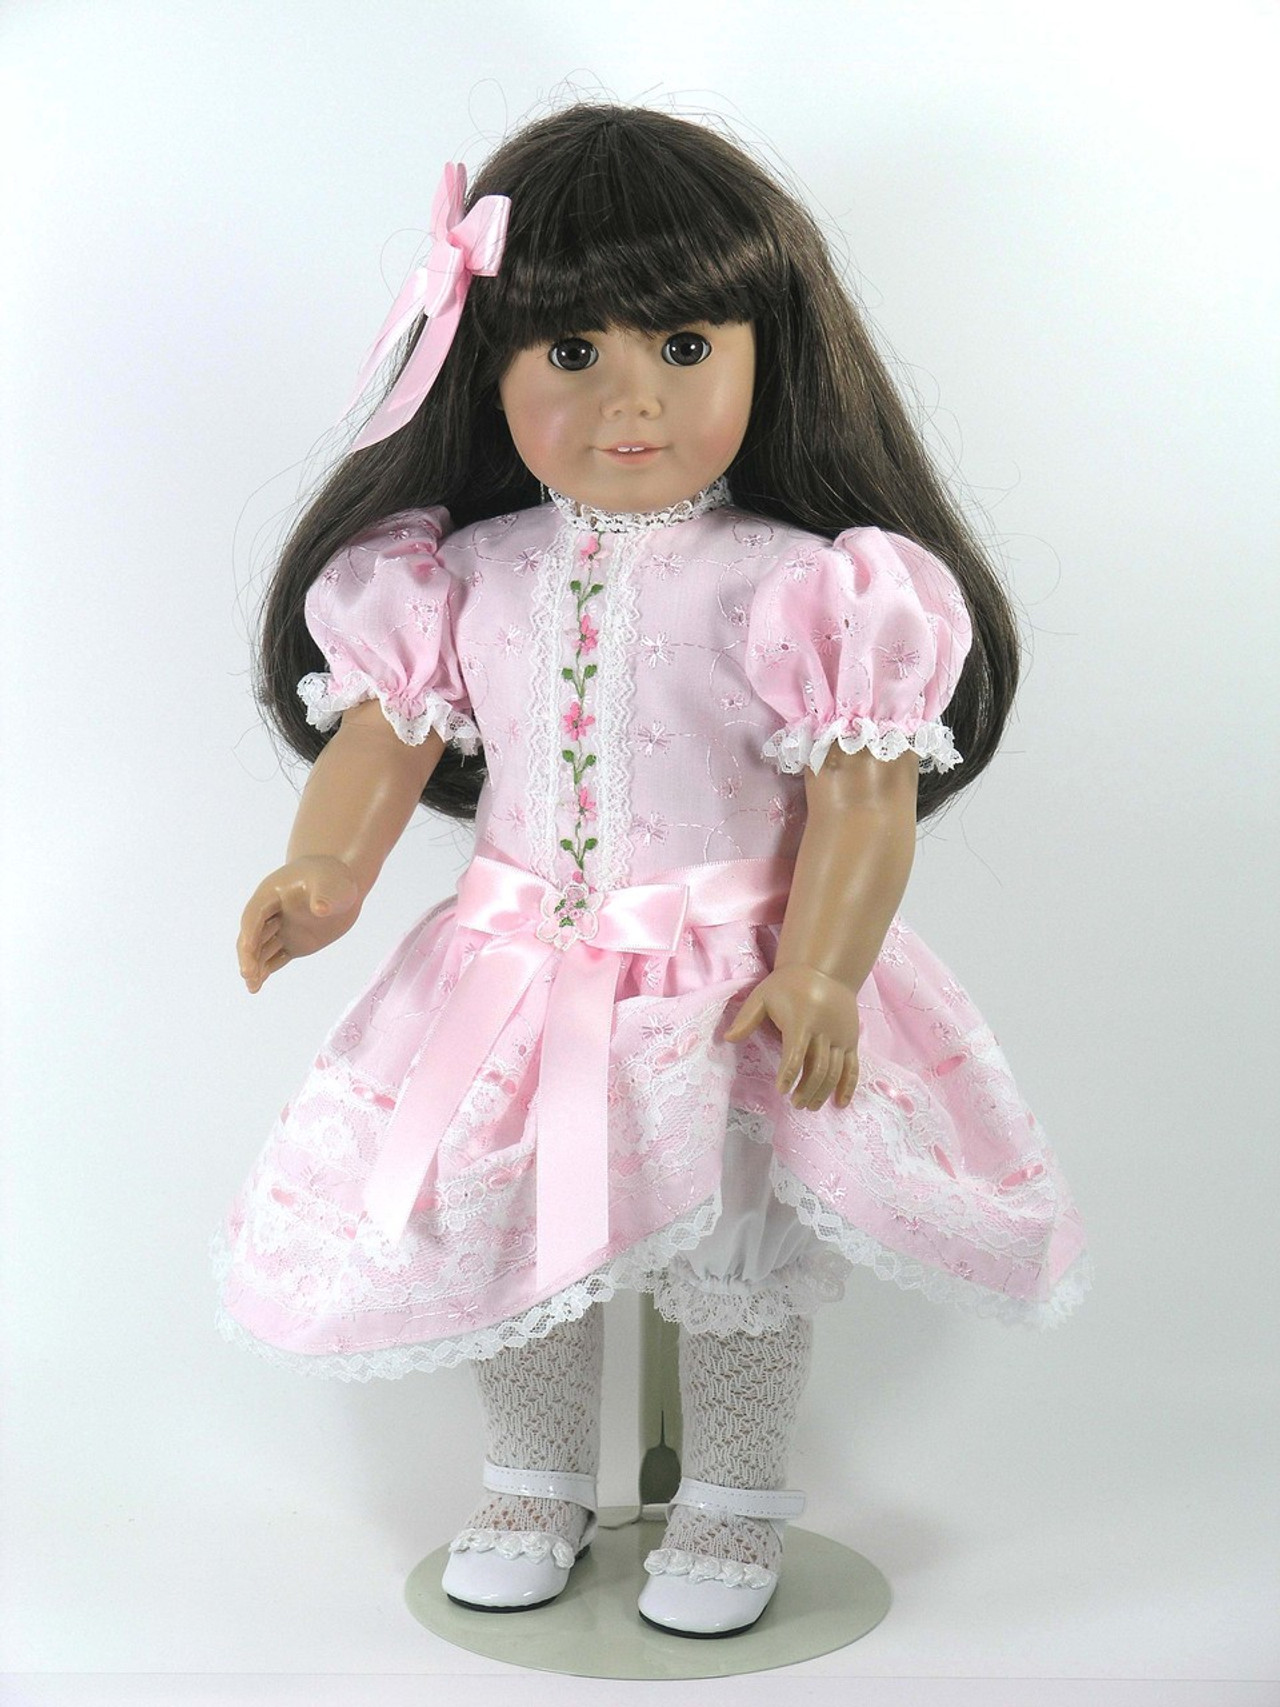 Clothes for Samantha, Rebecca - Exclusively Linda Doll Clothes